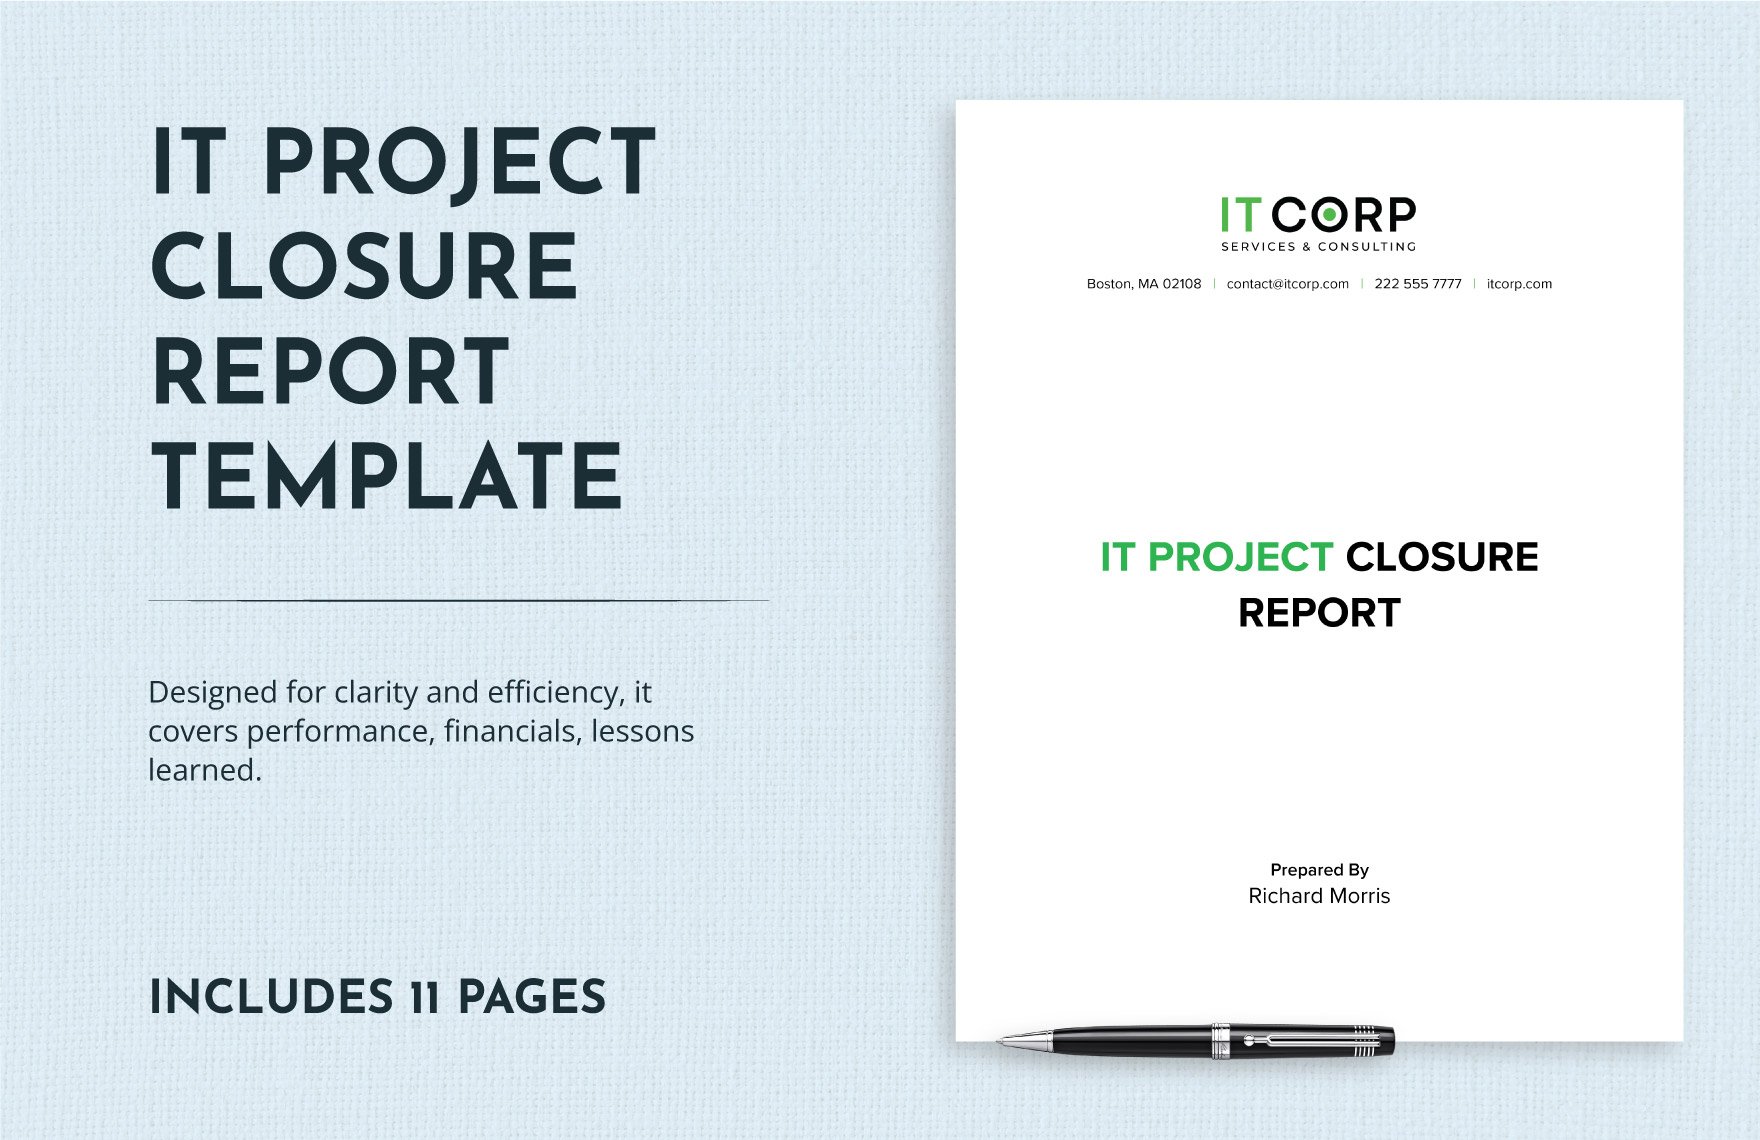 IT Project Closure Report Template